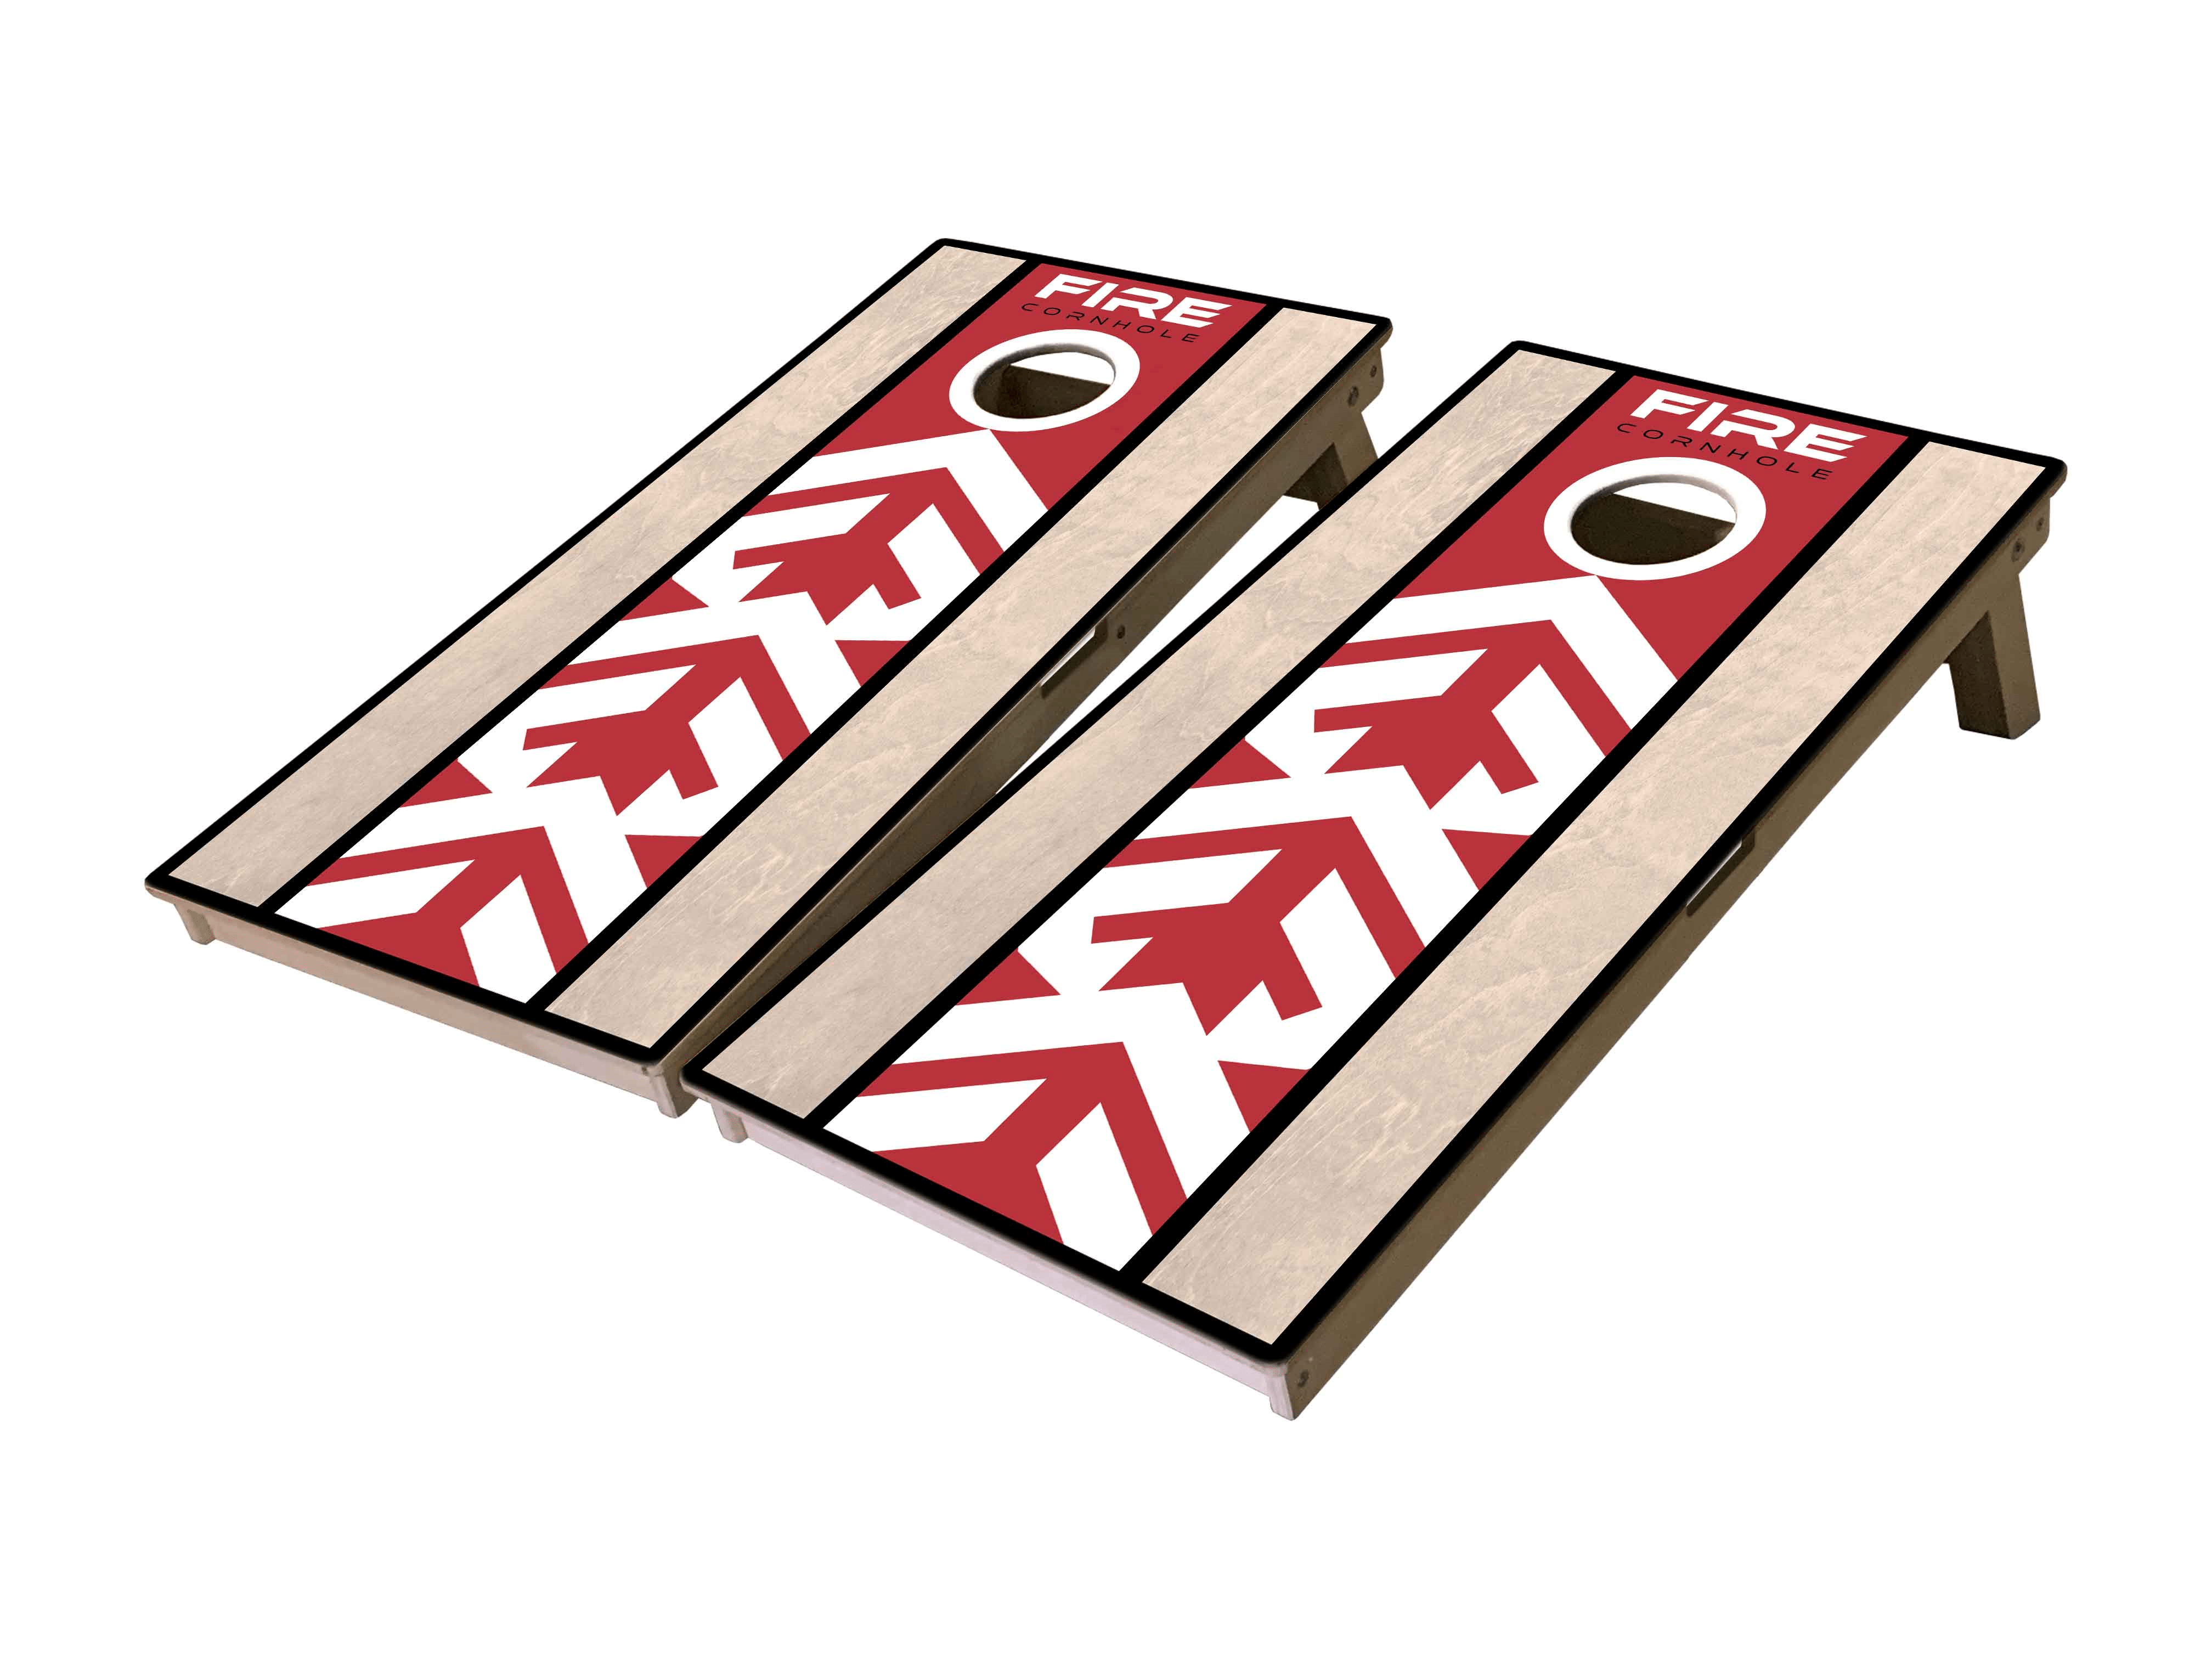 Fire Cornhole boards with design in red and white